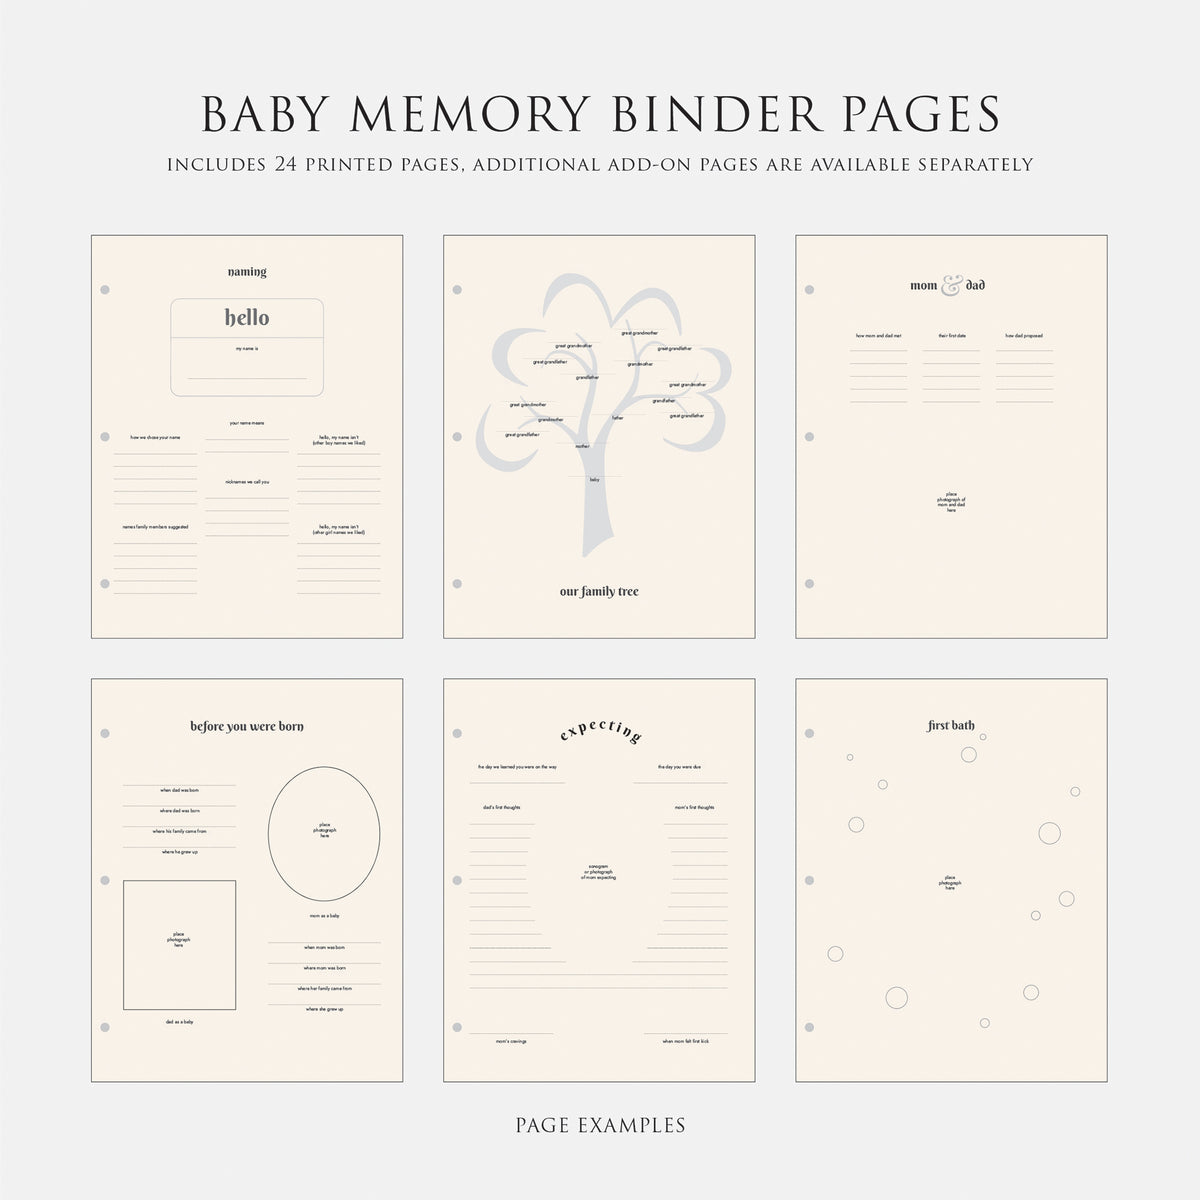 Personalized Baby Memory Binder with Amethyst Silk Cover | Select Your Own Pages